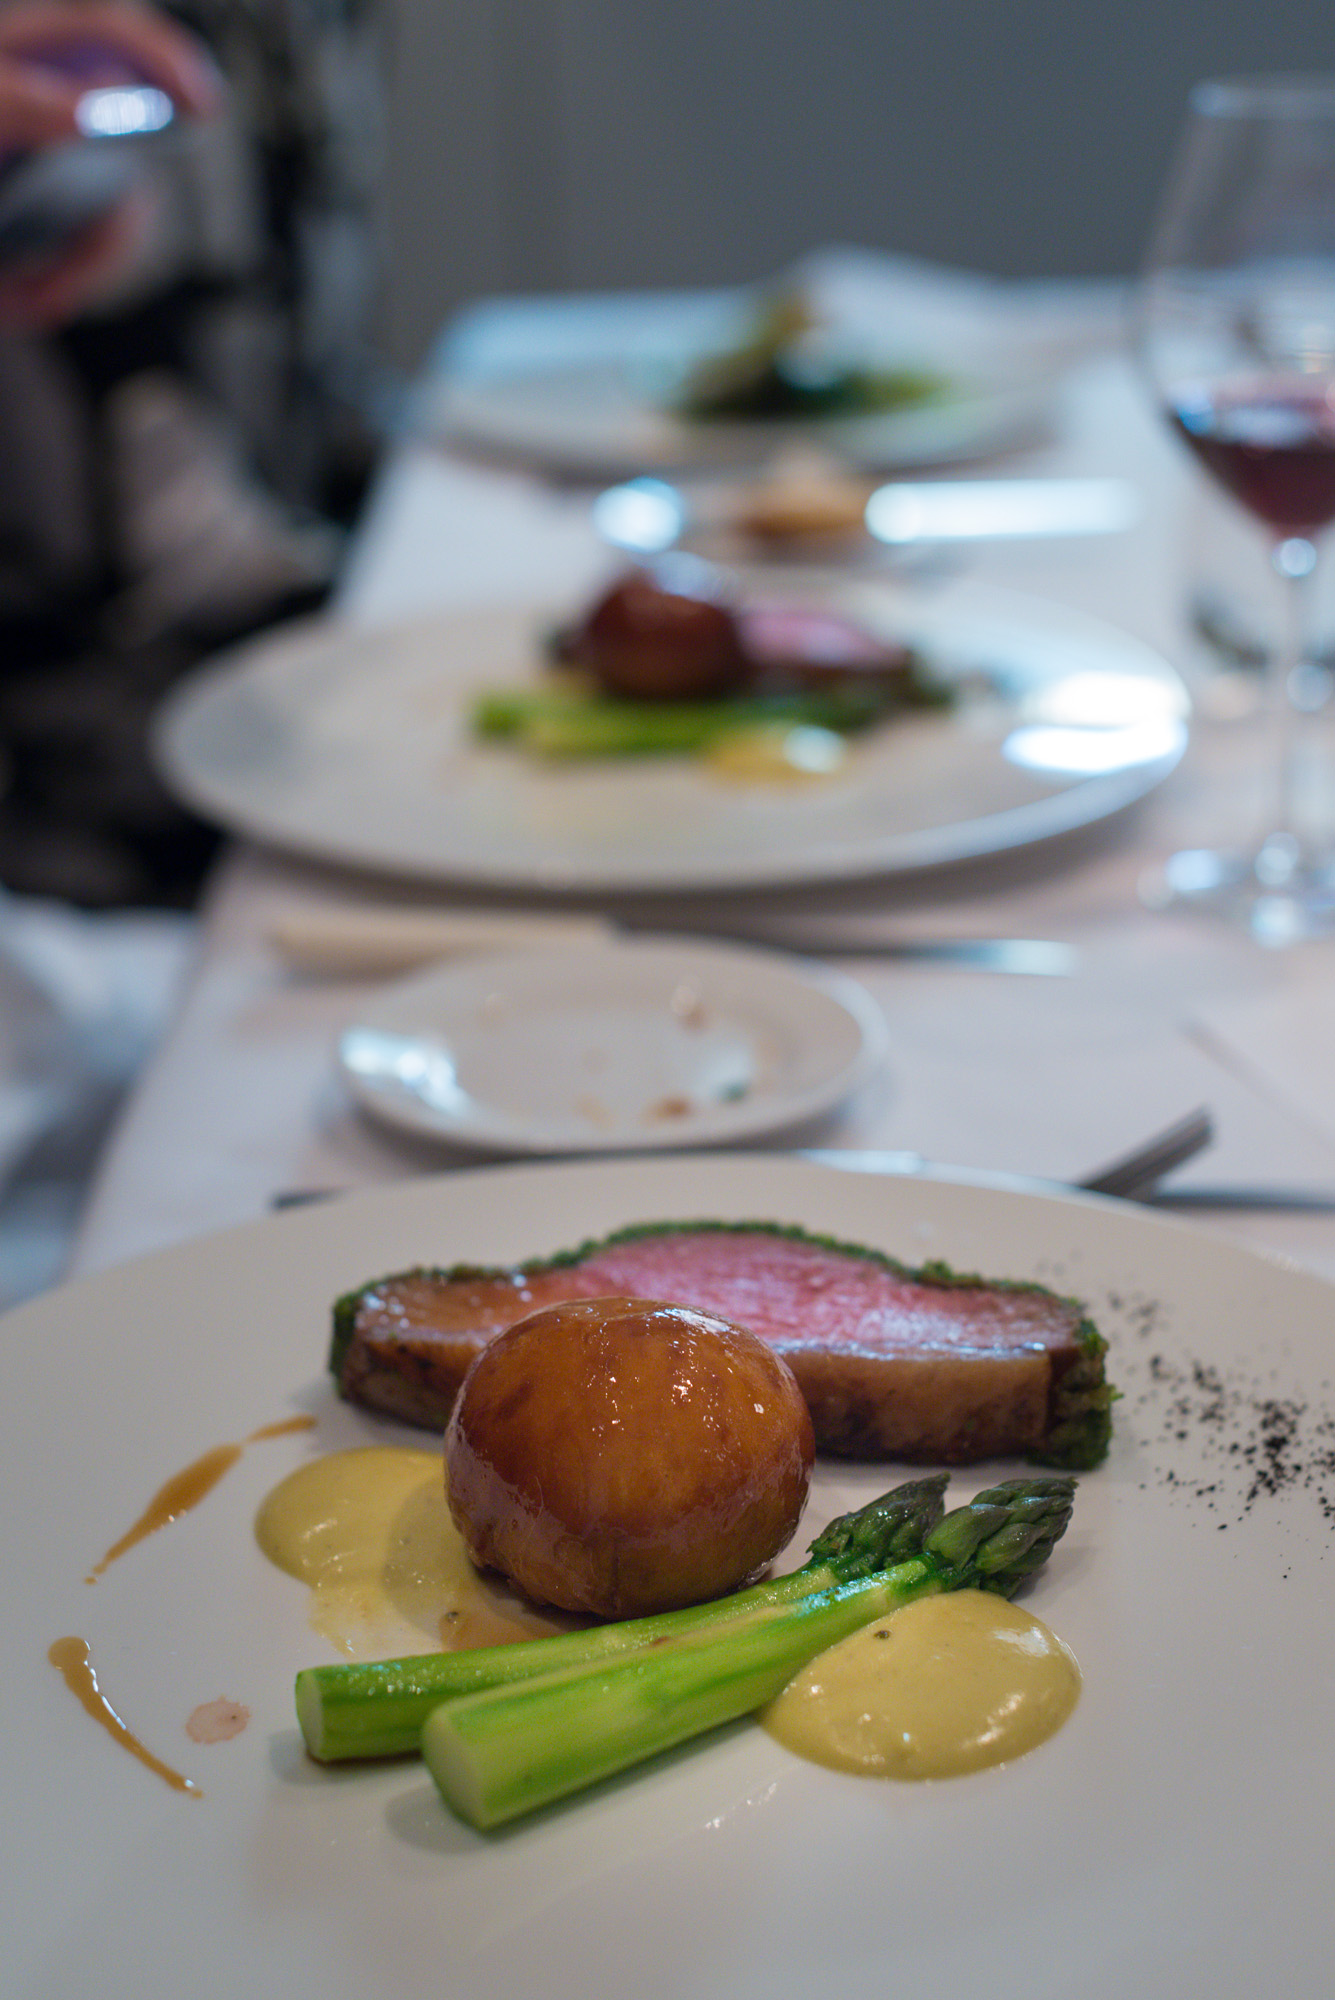 saddle of lamb, asparagus and sticky sweetbread buns - and German Syrah